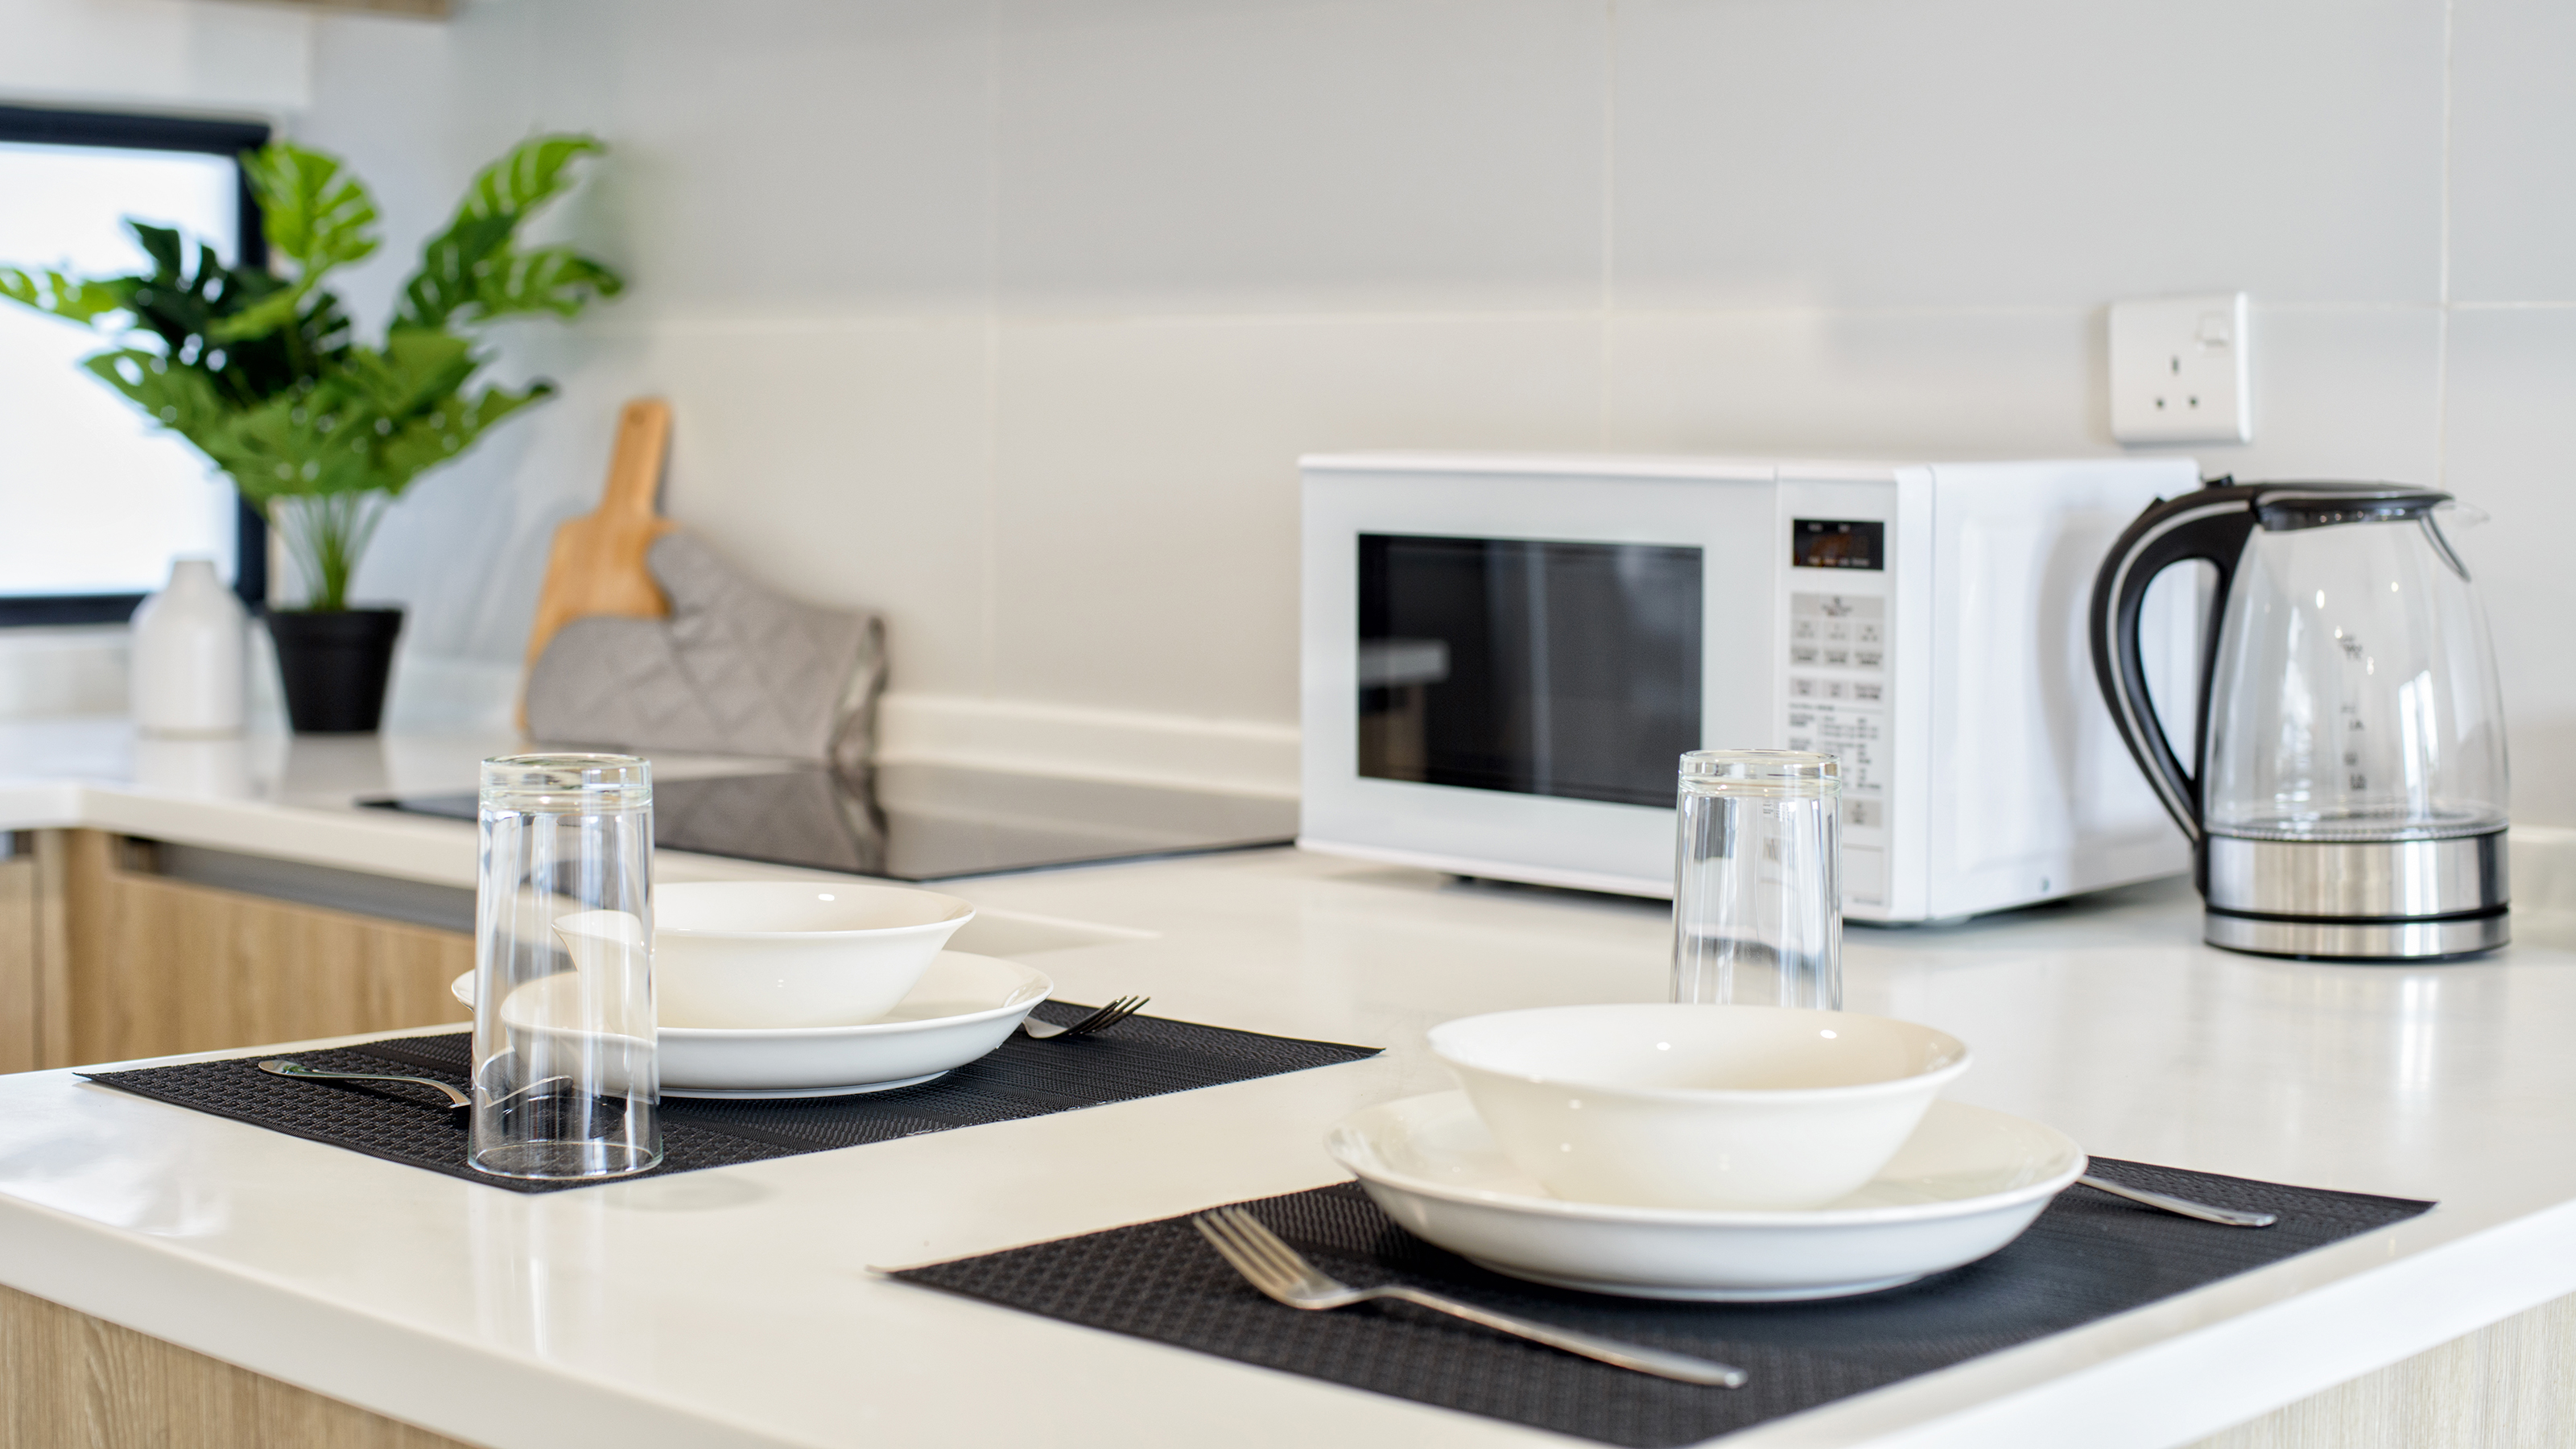 How To Clean A Smelly Microwave With Common Kitchen Products